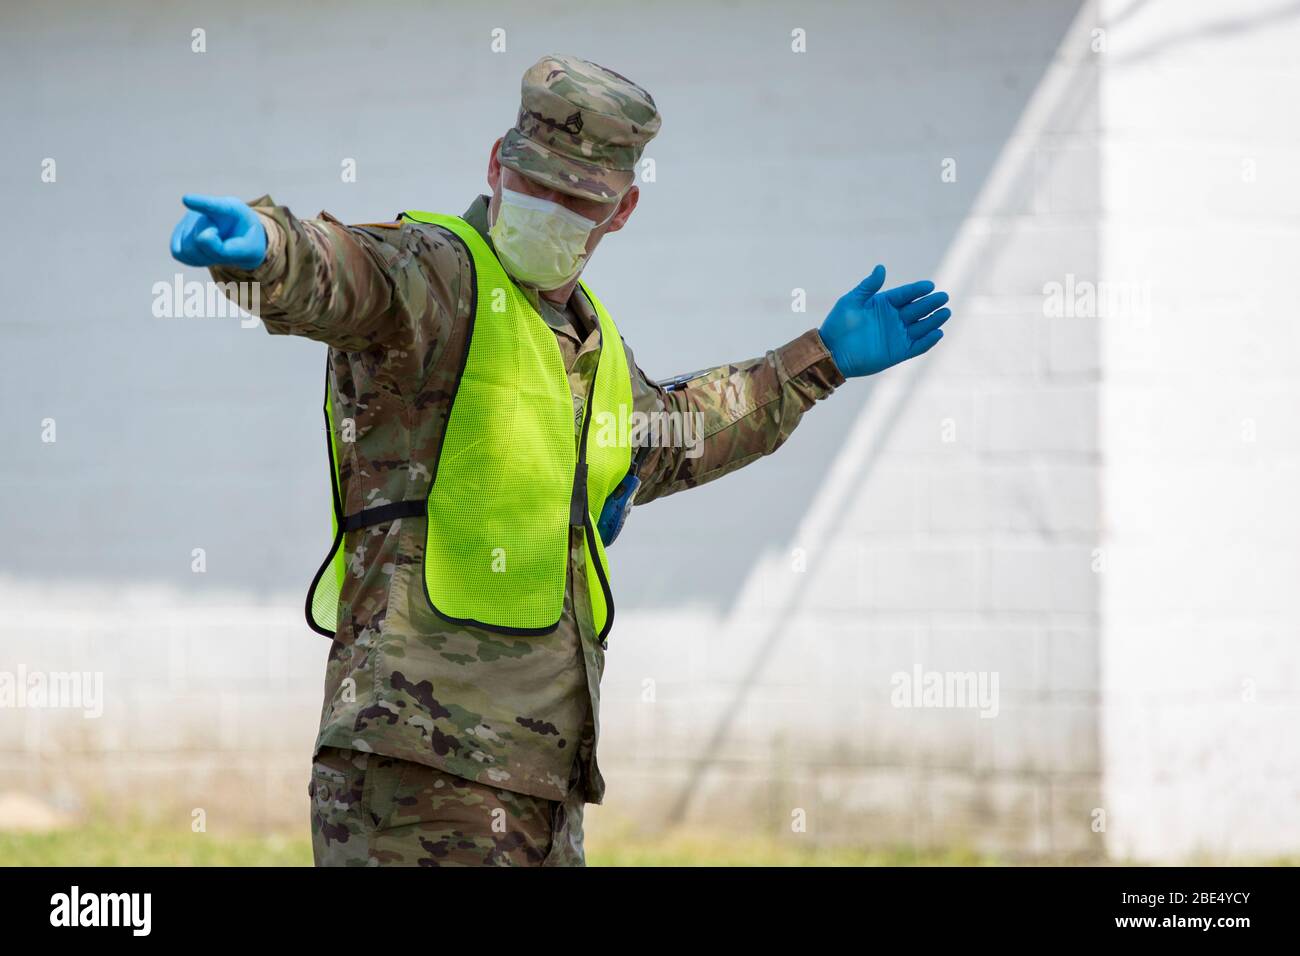 RIPLEY, USA - 10 Apr 2020 - U.S. Army Staff Sgt. Robert Wilson, a cavalry scout assigned to Troop B, 1st Squadron, 98th Cavalry Regiment, Mississippi Stock Photo